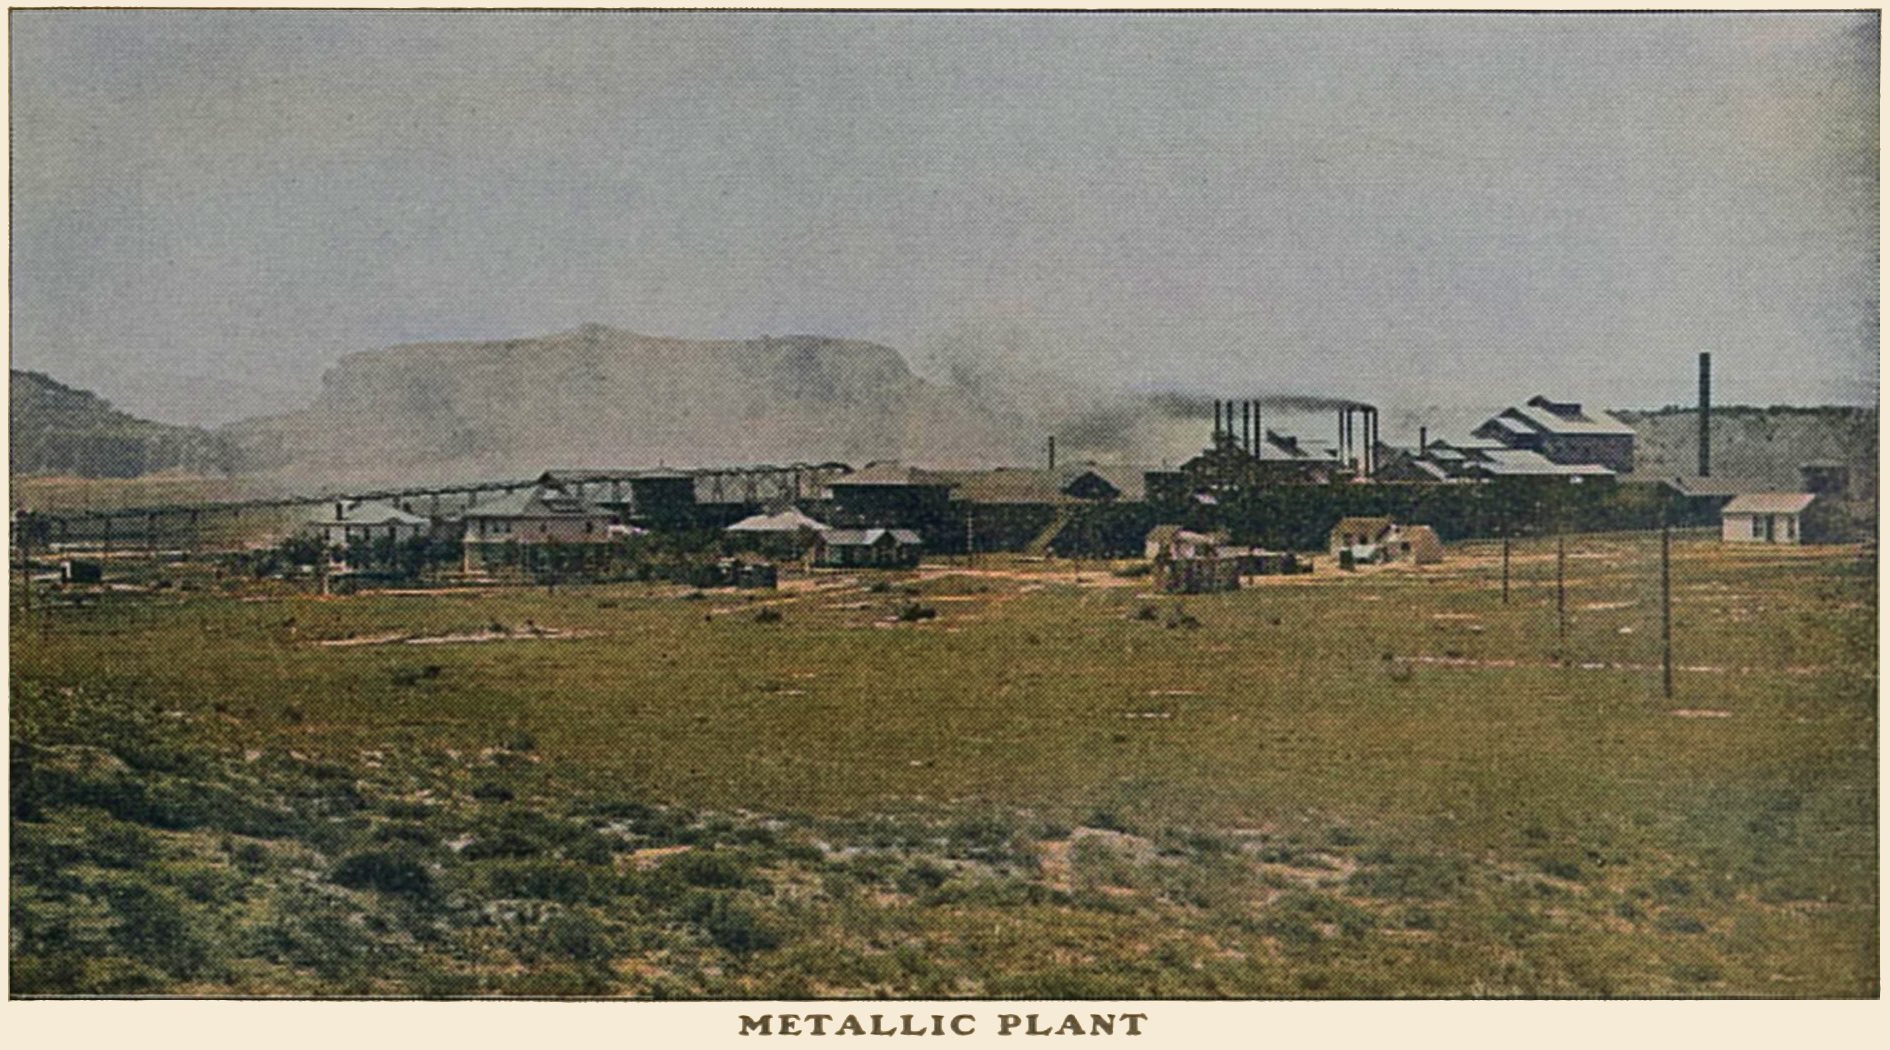 This somewhat distant view at the structures making up the Metallic or Bi-Metallic Mill located at Cyanide, a stop along the main-line of the F. & C.C. on its route to Cripple Creek from Florence, shows a huge operation that lasted less than ten year. Late 1894 it is reported ground is being broken to create this mill, and in January 1904 it is fully burned down while being dismantled.
   I think the direction of this view is in a northwesterly direction. Just north of this location the Vesta branch of the F. & C.C. took off. But this was from the beginning a Cyanide based mill operation, while the other mills along the before mention Vesta branch was more into the Chlorination business from what I been able to understand. In 1903 this plant belongs to the United States Reduction & Refining Co.
   I did procure the colored version of the image. Source was gray-toned, or in common speech black & white. Used an online service and tweaked and worked with image to get what looks best to my eyes for the moment.